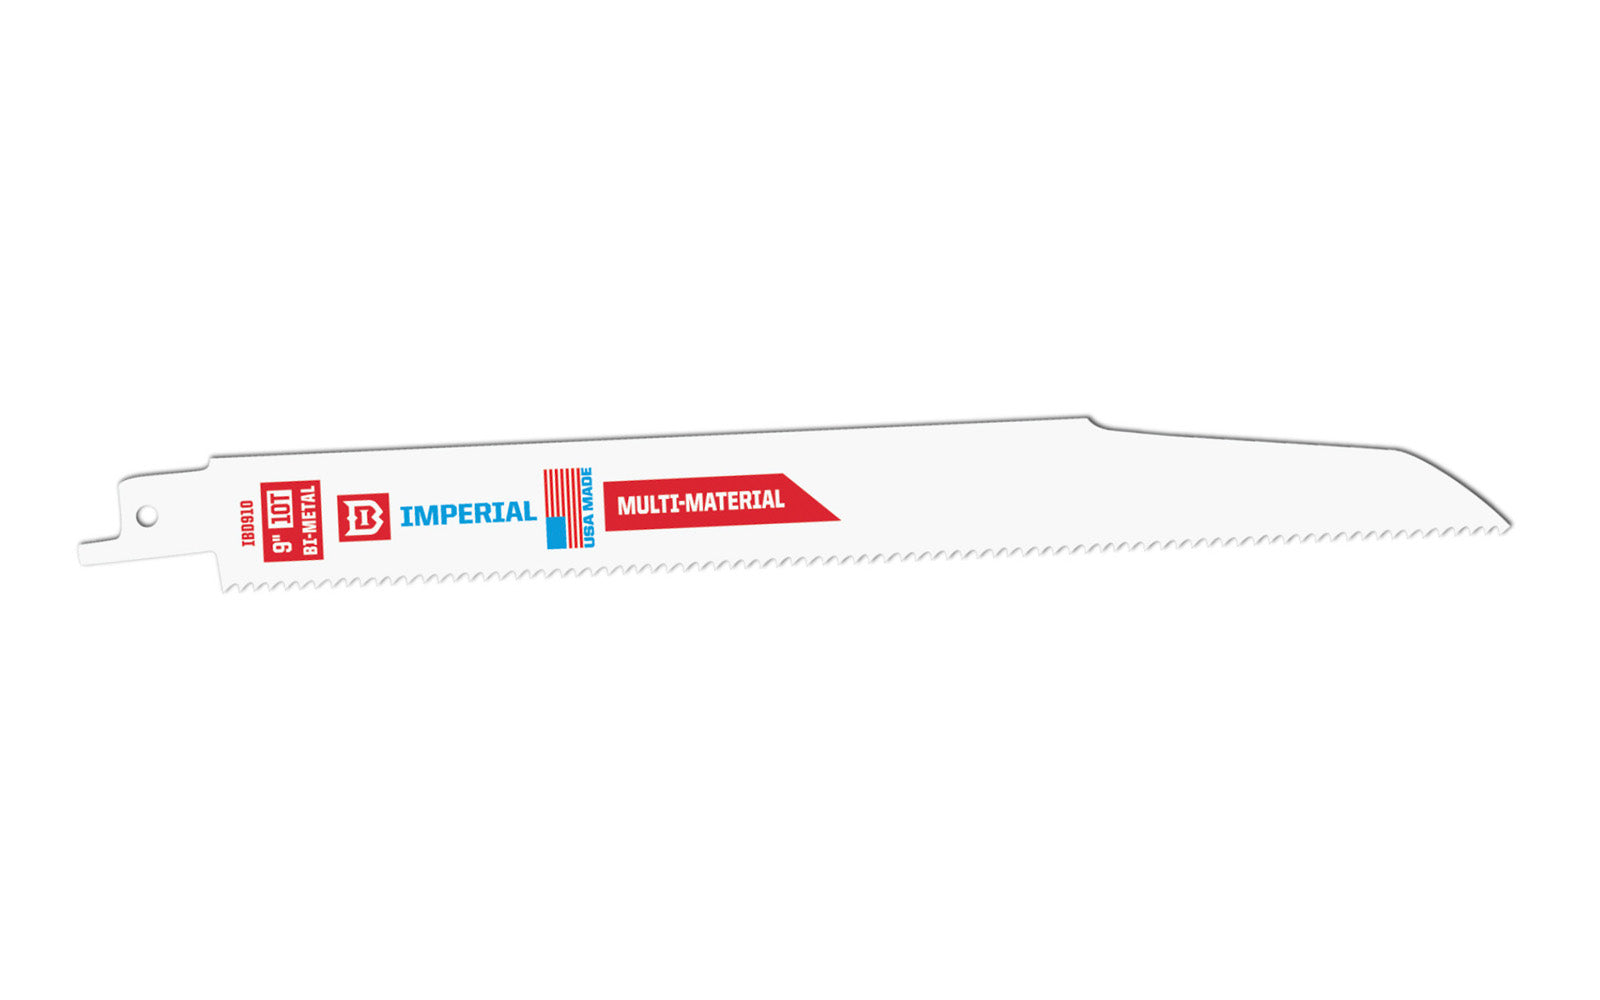 Imperial Blades Demolition 9" Bi-Metal 10 TPI Multi-Material Reciprocating Blade. Optimal for rough-in cutting a wide range of demolition materials on the construction site. Recommended applications:  Wood & Nails, Fiber Cement, Wood, Wood Composites, PVC, Rubber. Made in USA. Model IBD910-B. BiMetal blade